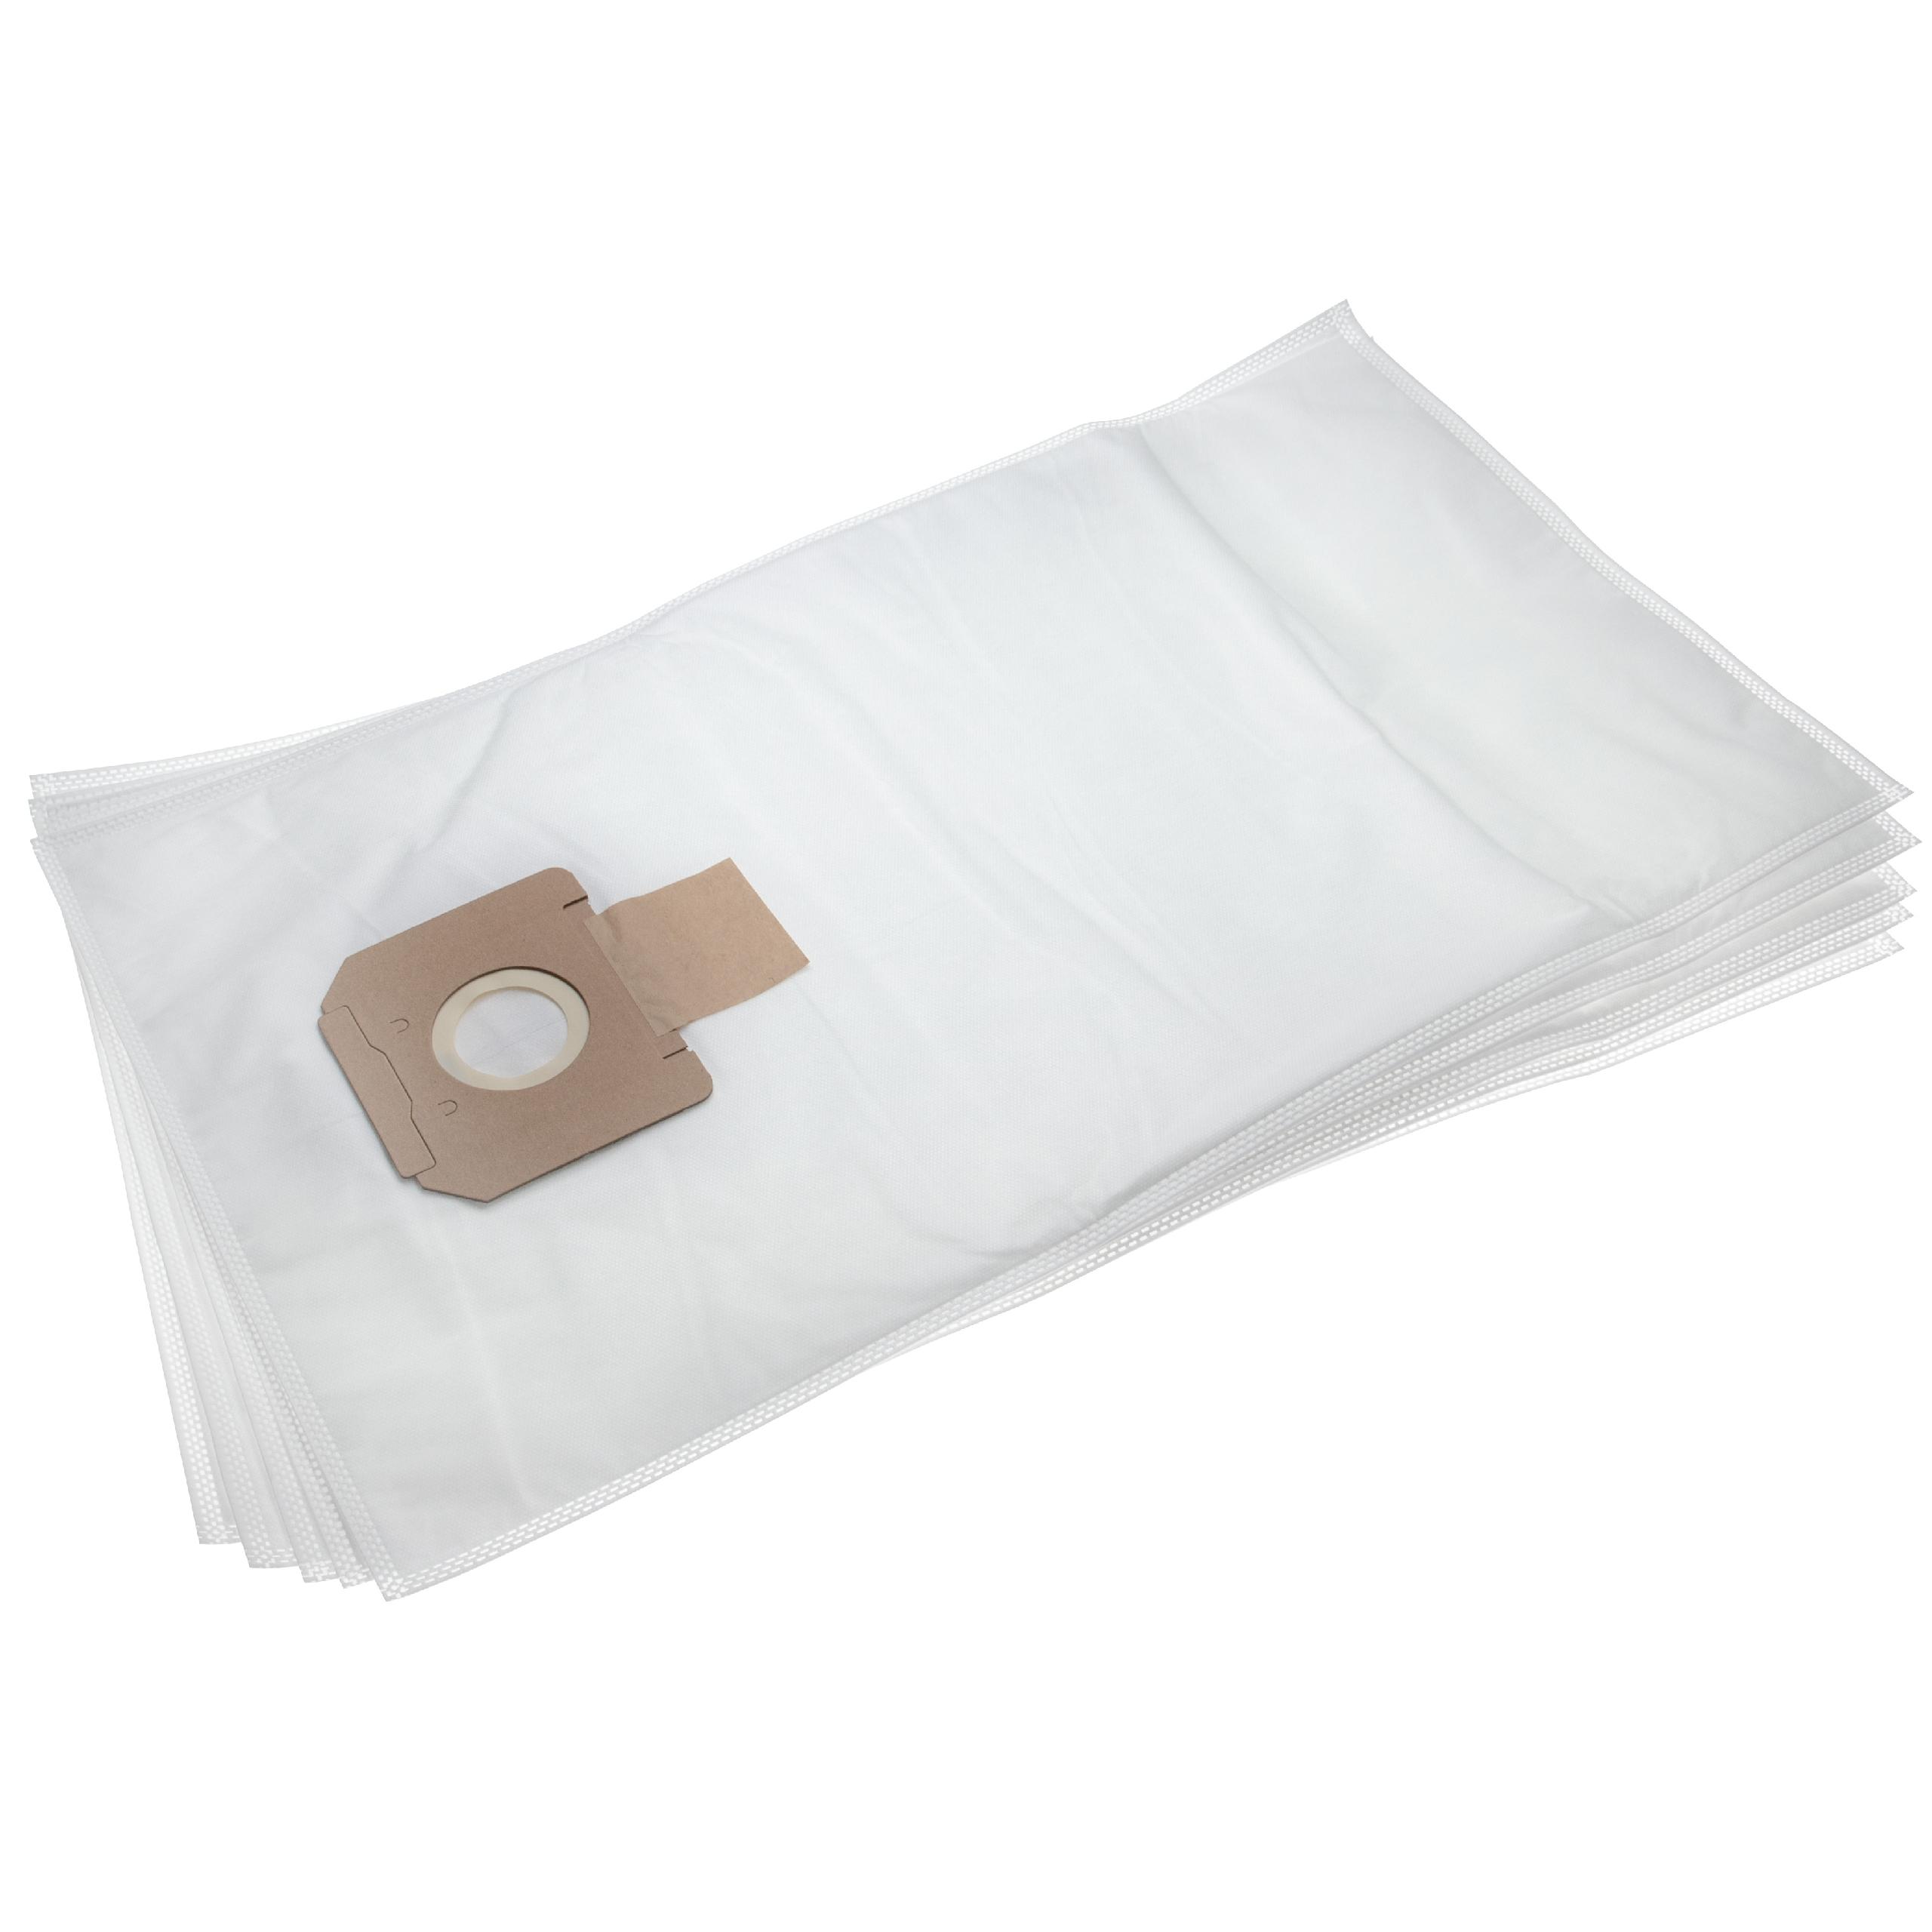 5x Vacuum Cleaner Bag replaces Bosch 2607432038 for Bosch - microfleece